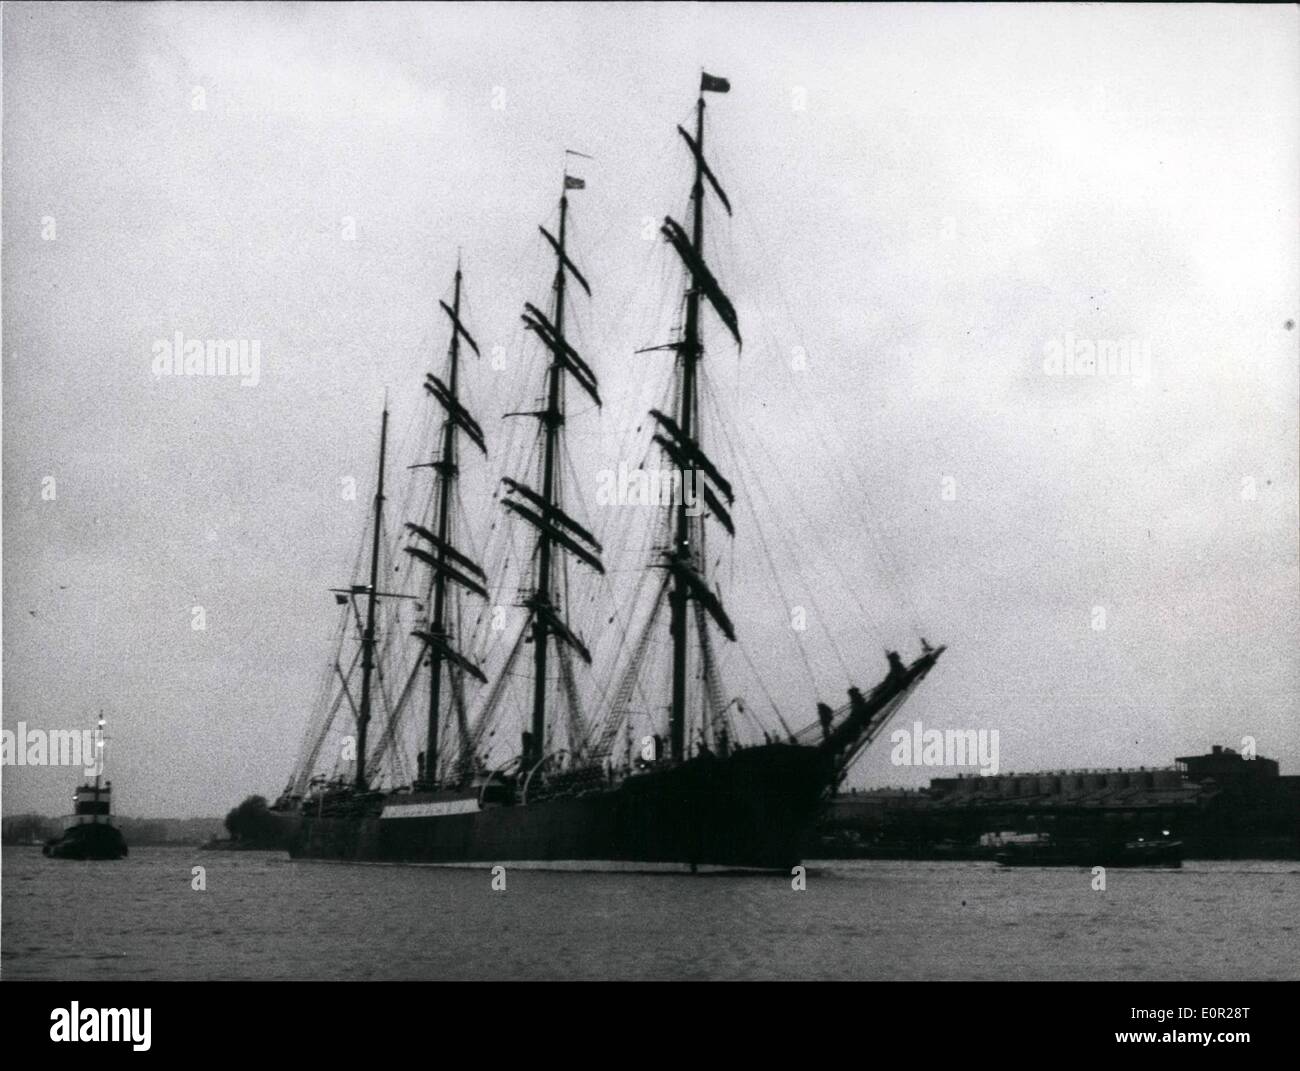 Dec. 12, 1957 - ''Passat'' again in Hamburg: The German windjammer ''Passat'', the sister-ship of the ''Pamir'' returned Sunday, December 8, 1957 to its home-port Hamburg. The ship had suffered a storm near the Azores by the beginning of November during which part of the grain had slid to one side. In the port of Lisbon, where the windjammer arrived under own power, the grain had to be reloaded - all of its 4000 tons Stock Photo